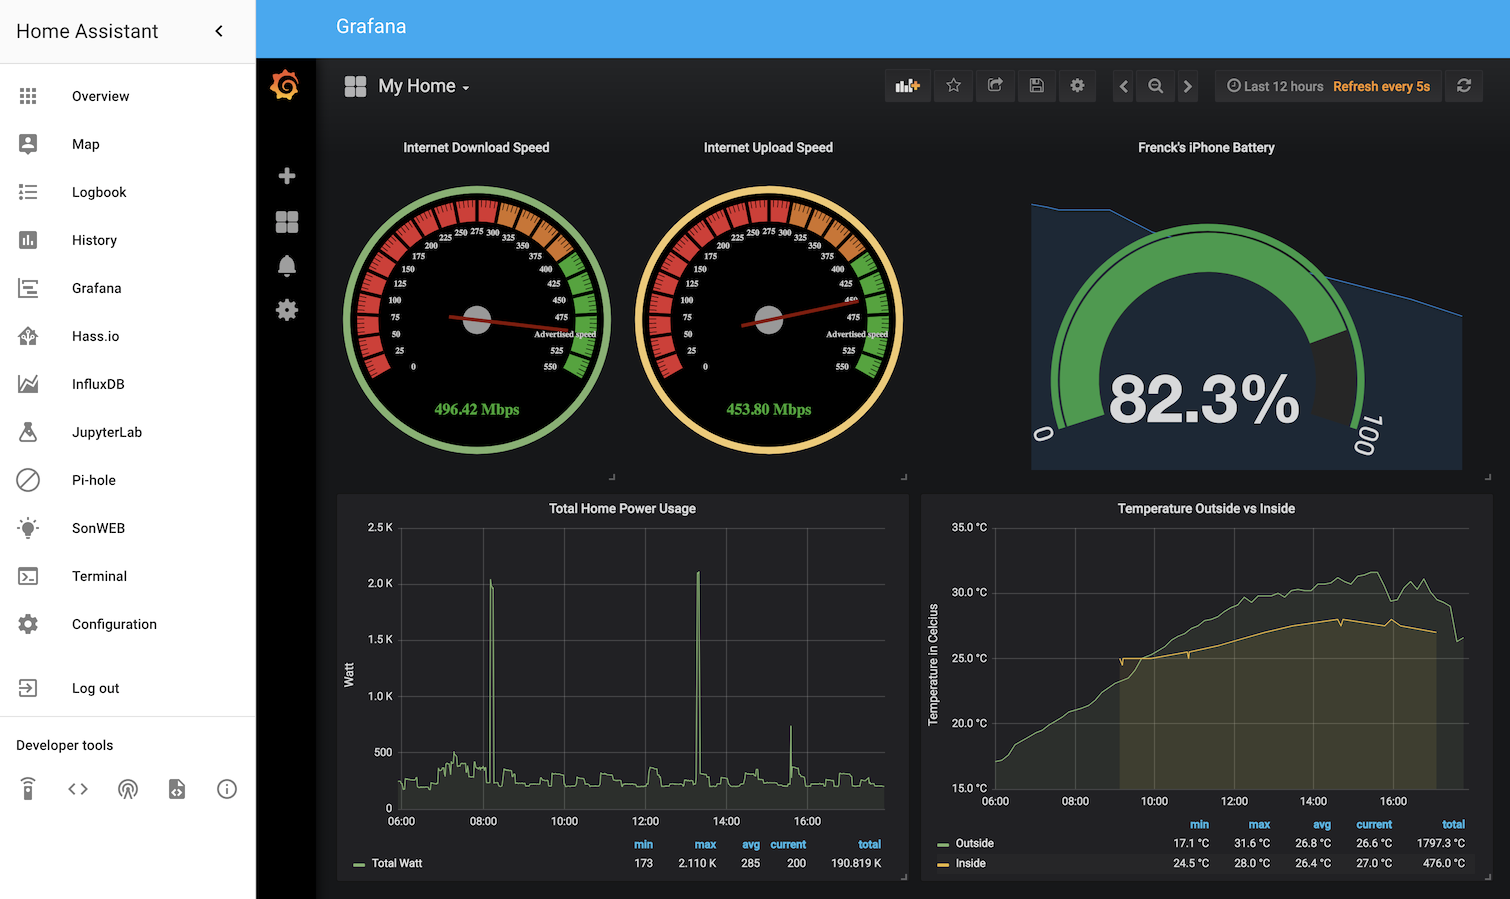 Grafana in the Home Assistant Frontend